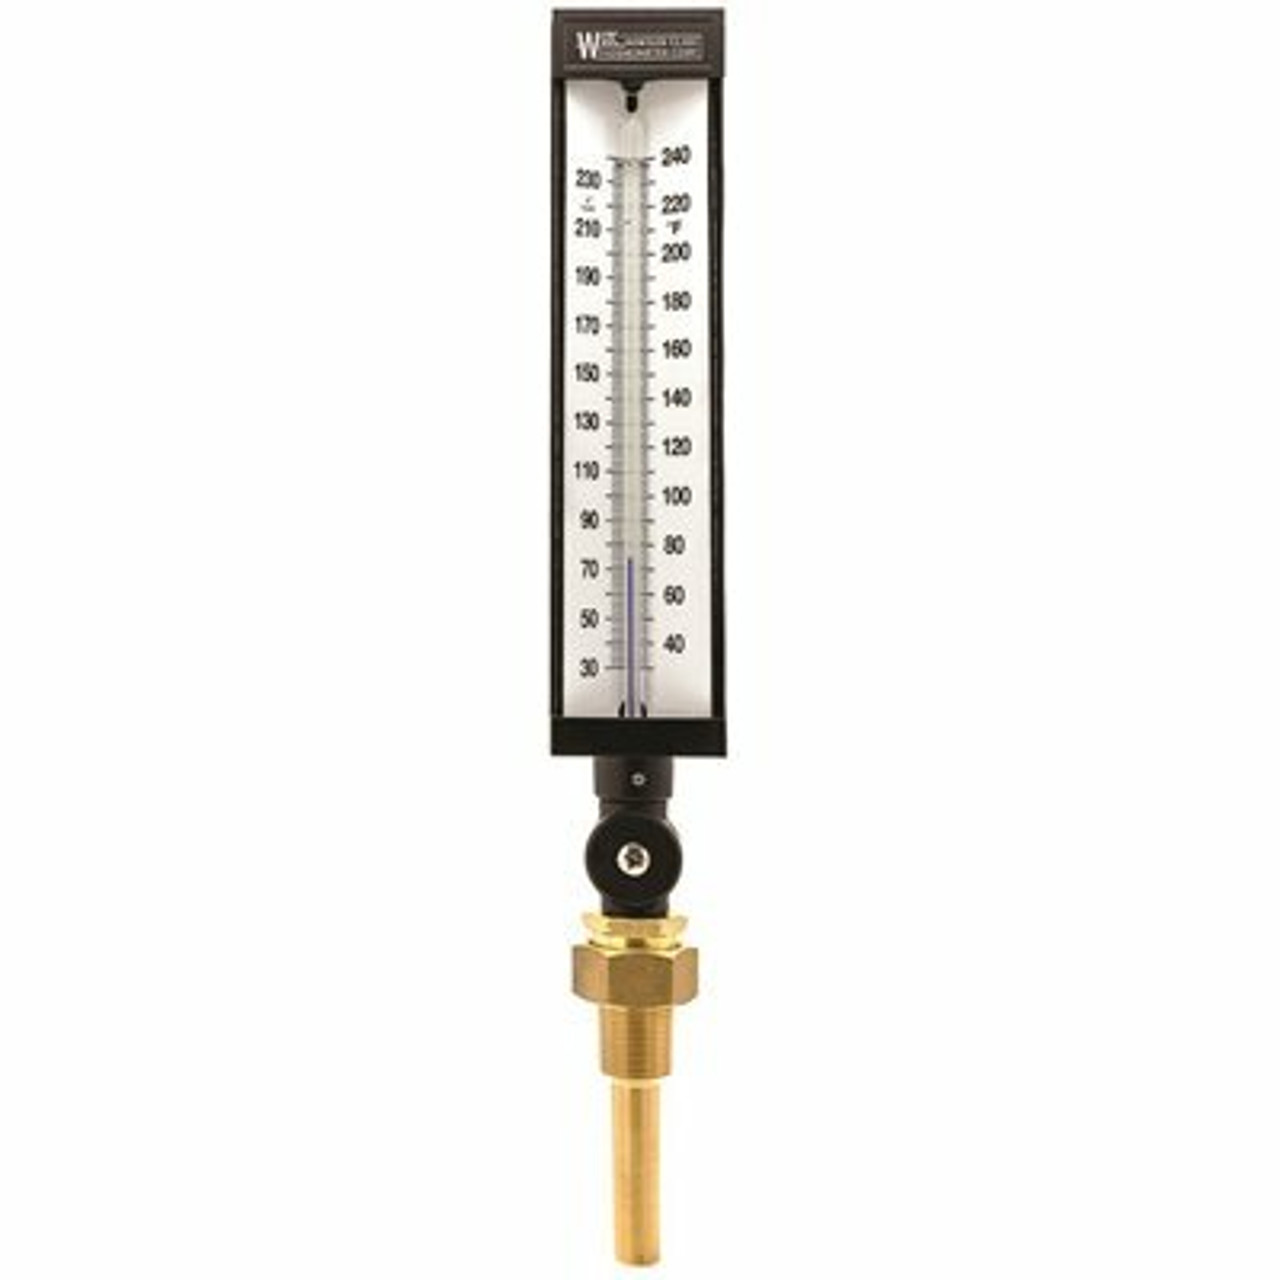 9 In. Scale 30-240 Deg.F Industrial Thermometer For Hvac Utility Accessory